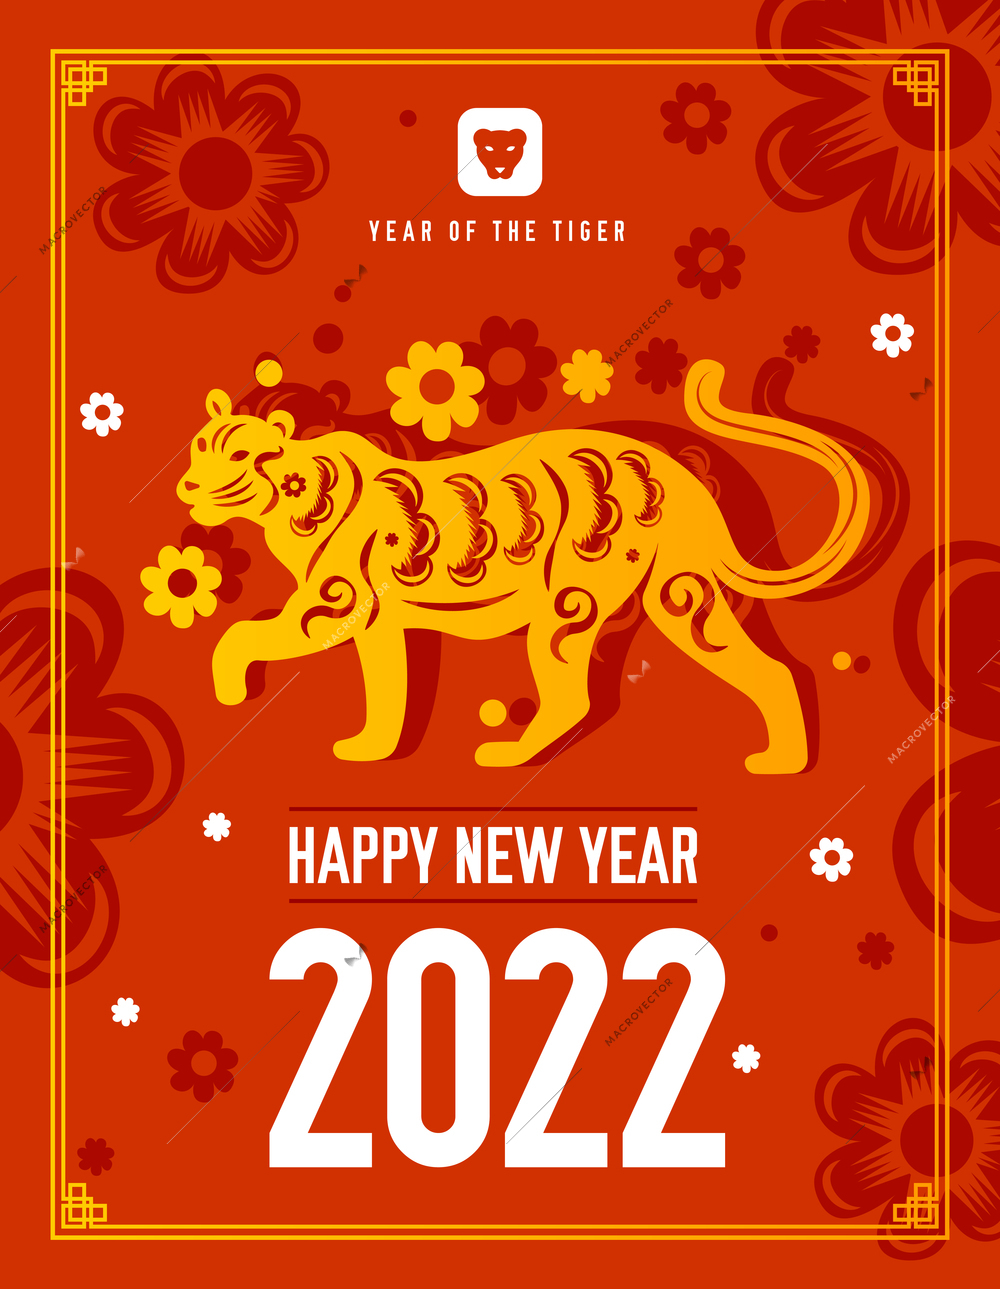 Chinese tiger 2022 zodiac sign vertical poster with editable text and ornate flowers with tiger character vector illustration